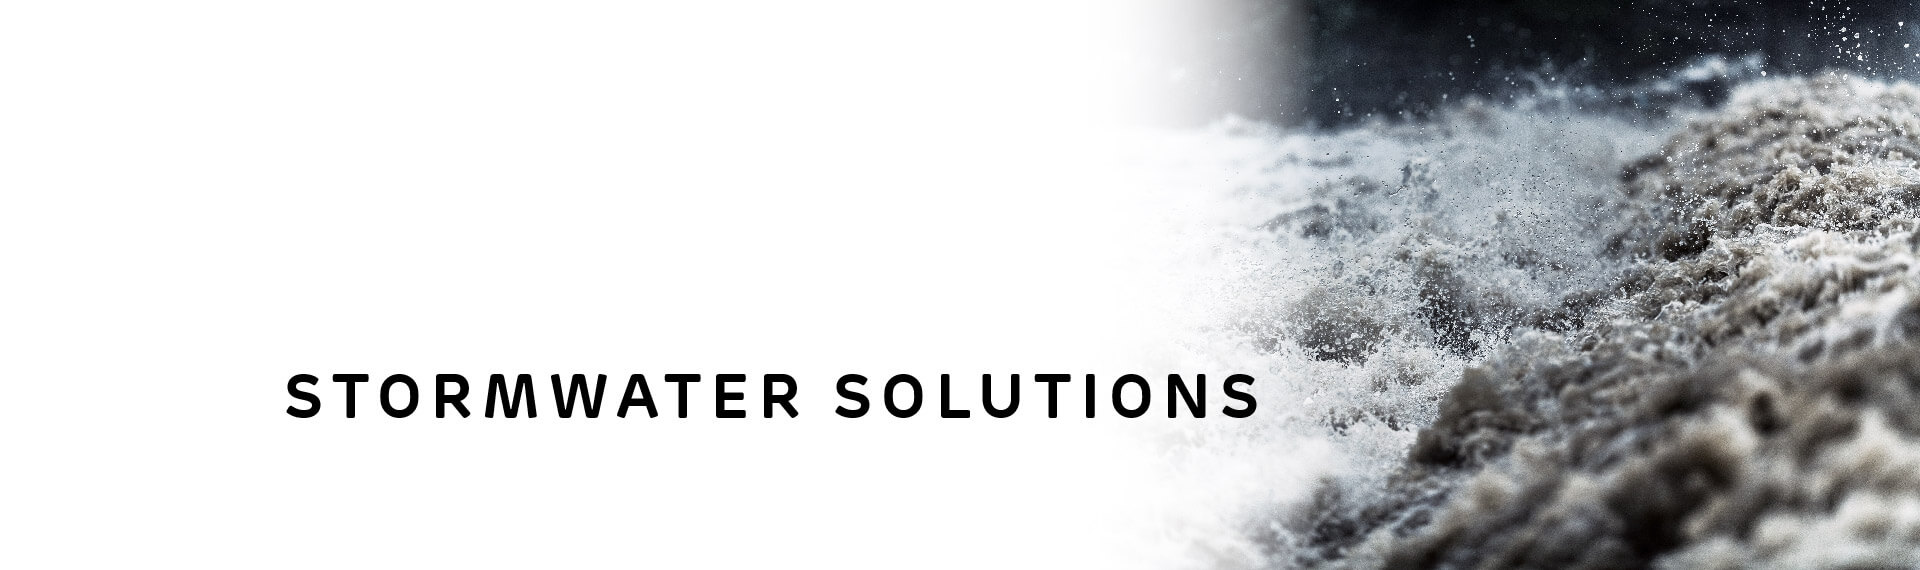 Header image with “Stormwater Solutions” in capital letters; with a photo of agitated storm water.